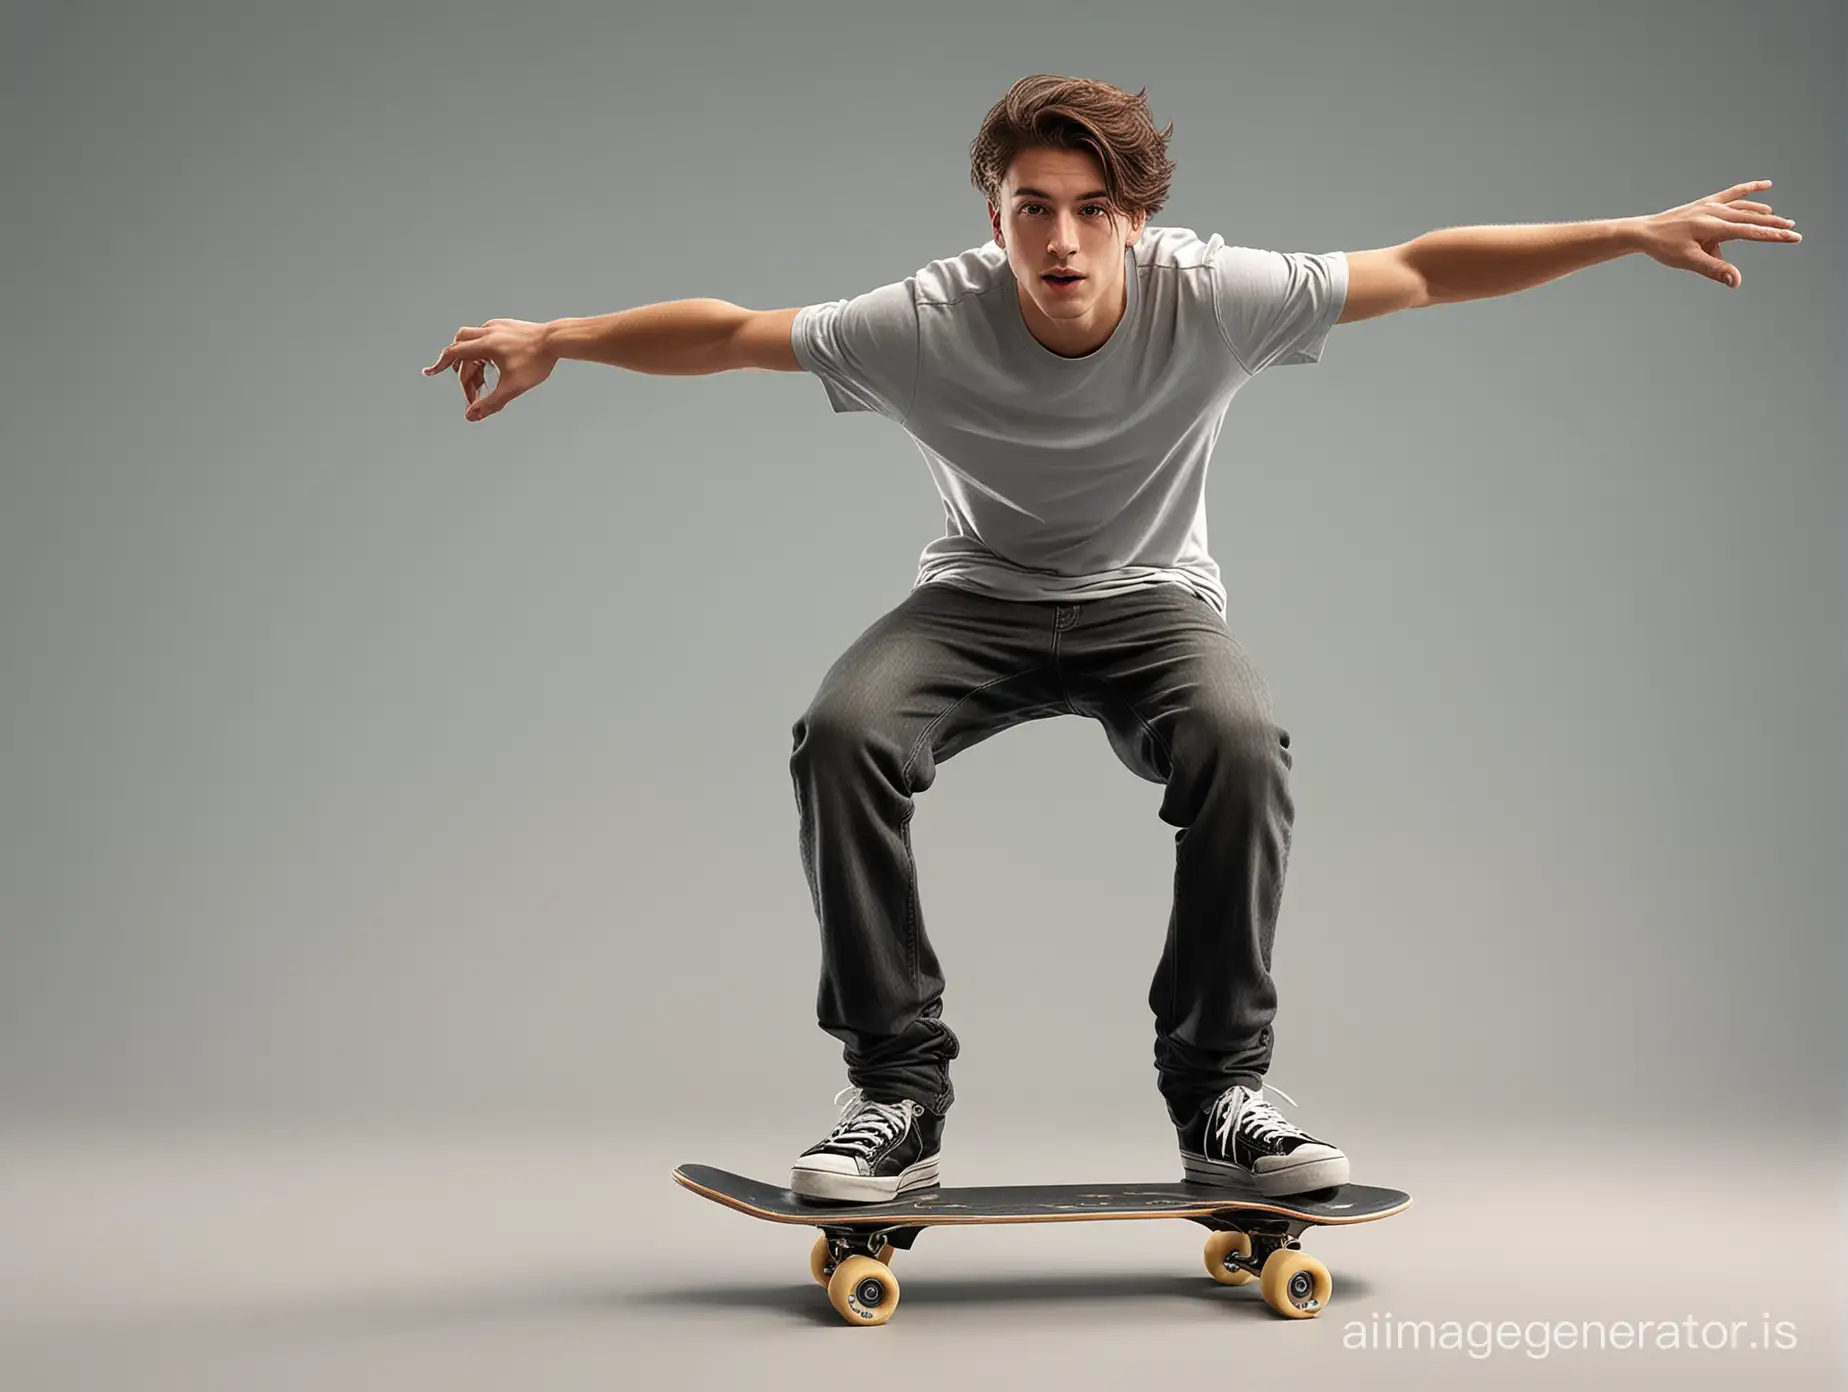 A young man, skate boarding, realistic